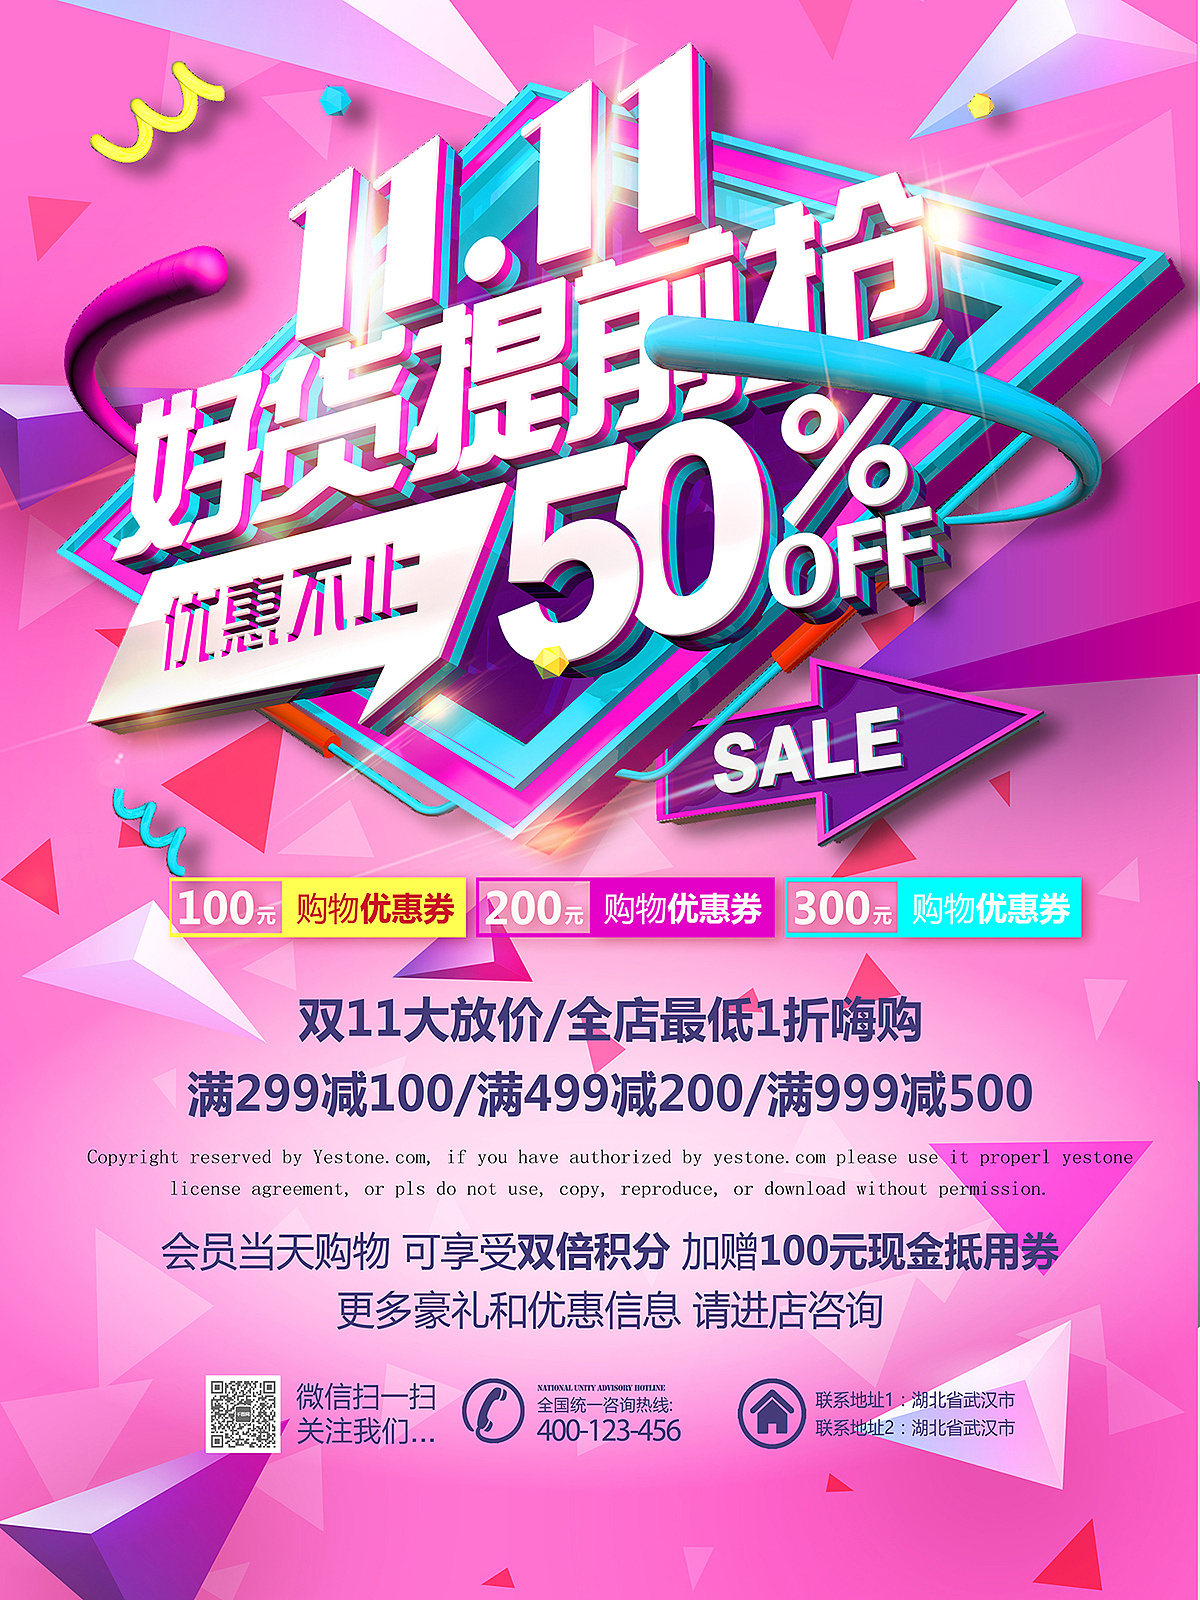 Pink fresh double eleven event poster template image_picture free ...